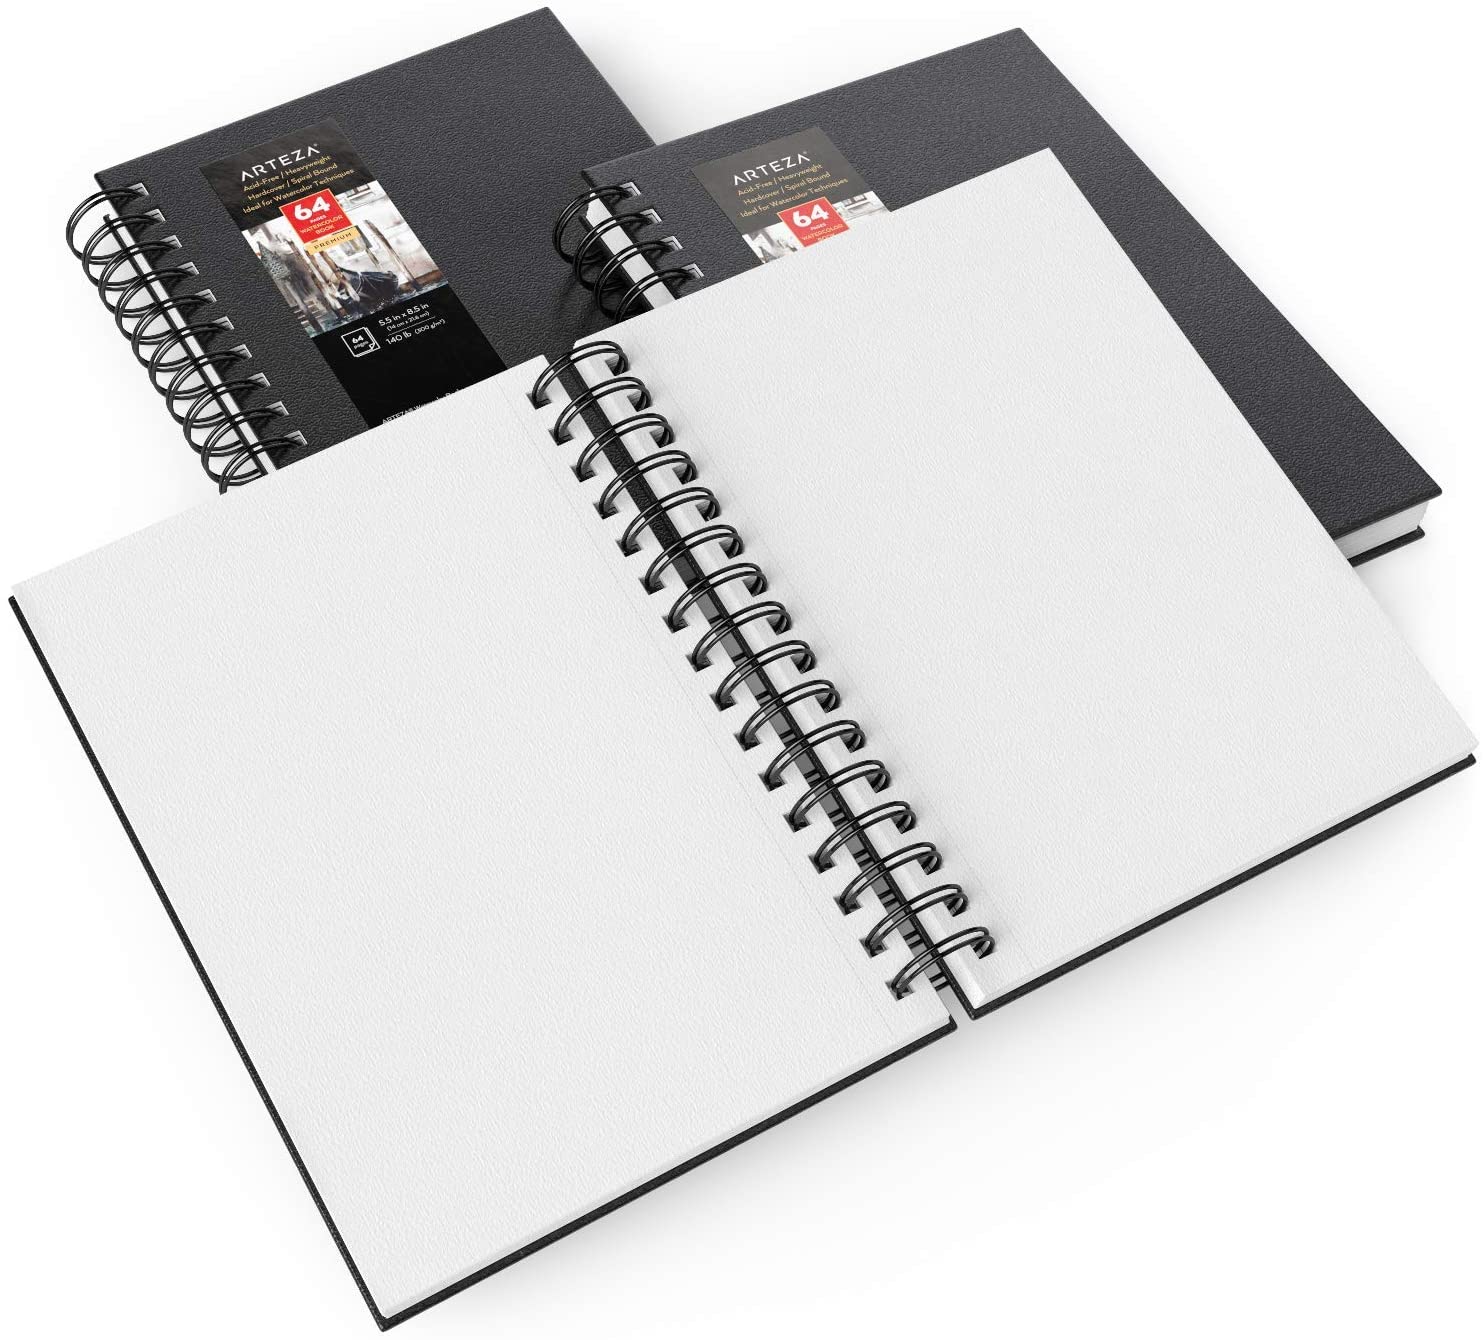 A4 Size Sketch Book with 250g Paper, Perfect for Acrylic and Watercolor  Painting, Featuring 20 Sheets of Textured Paper and Double Wire Spiraled  Binding